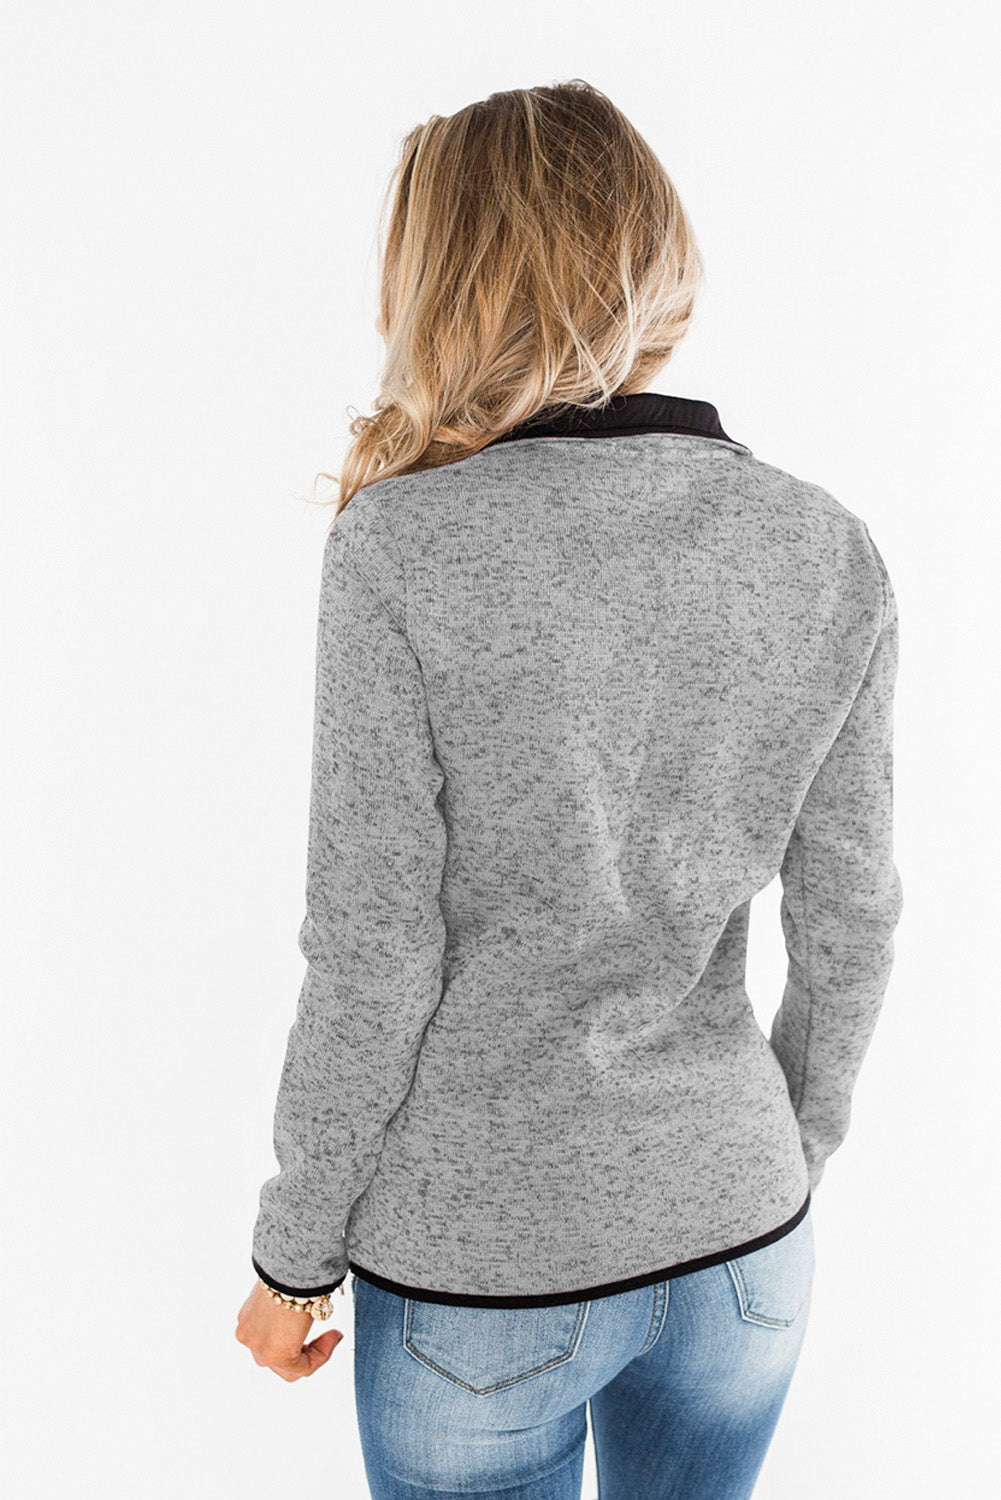 KaleaBoutique Beautiful Heathered Turn-down Collar Pullover Sweatshirt - KaleaBoutique.com